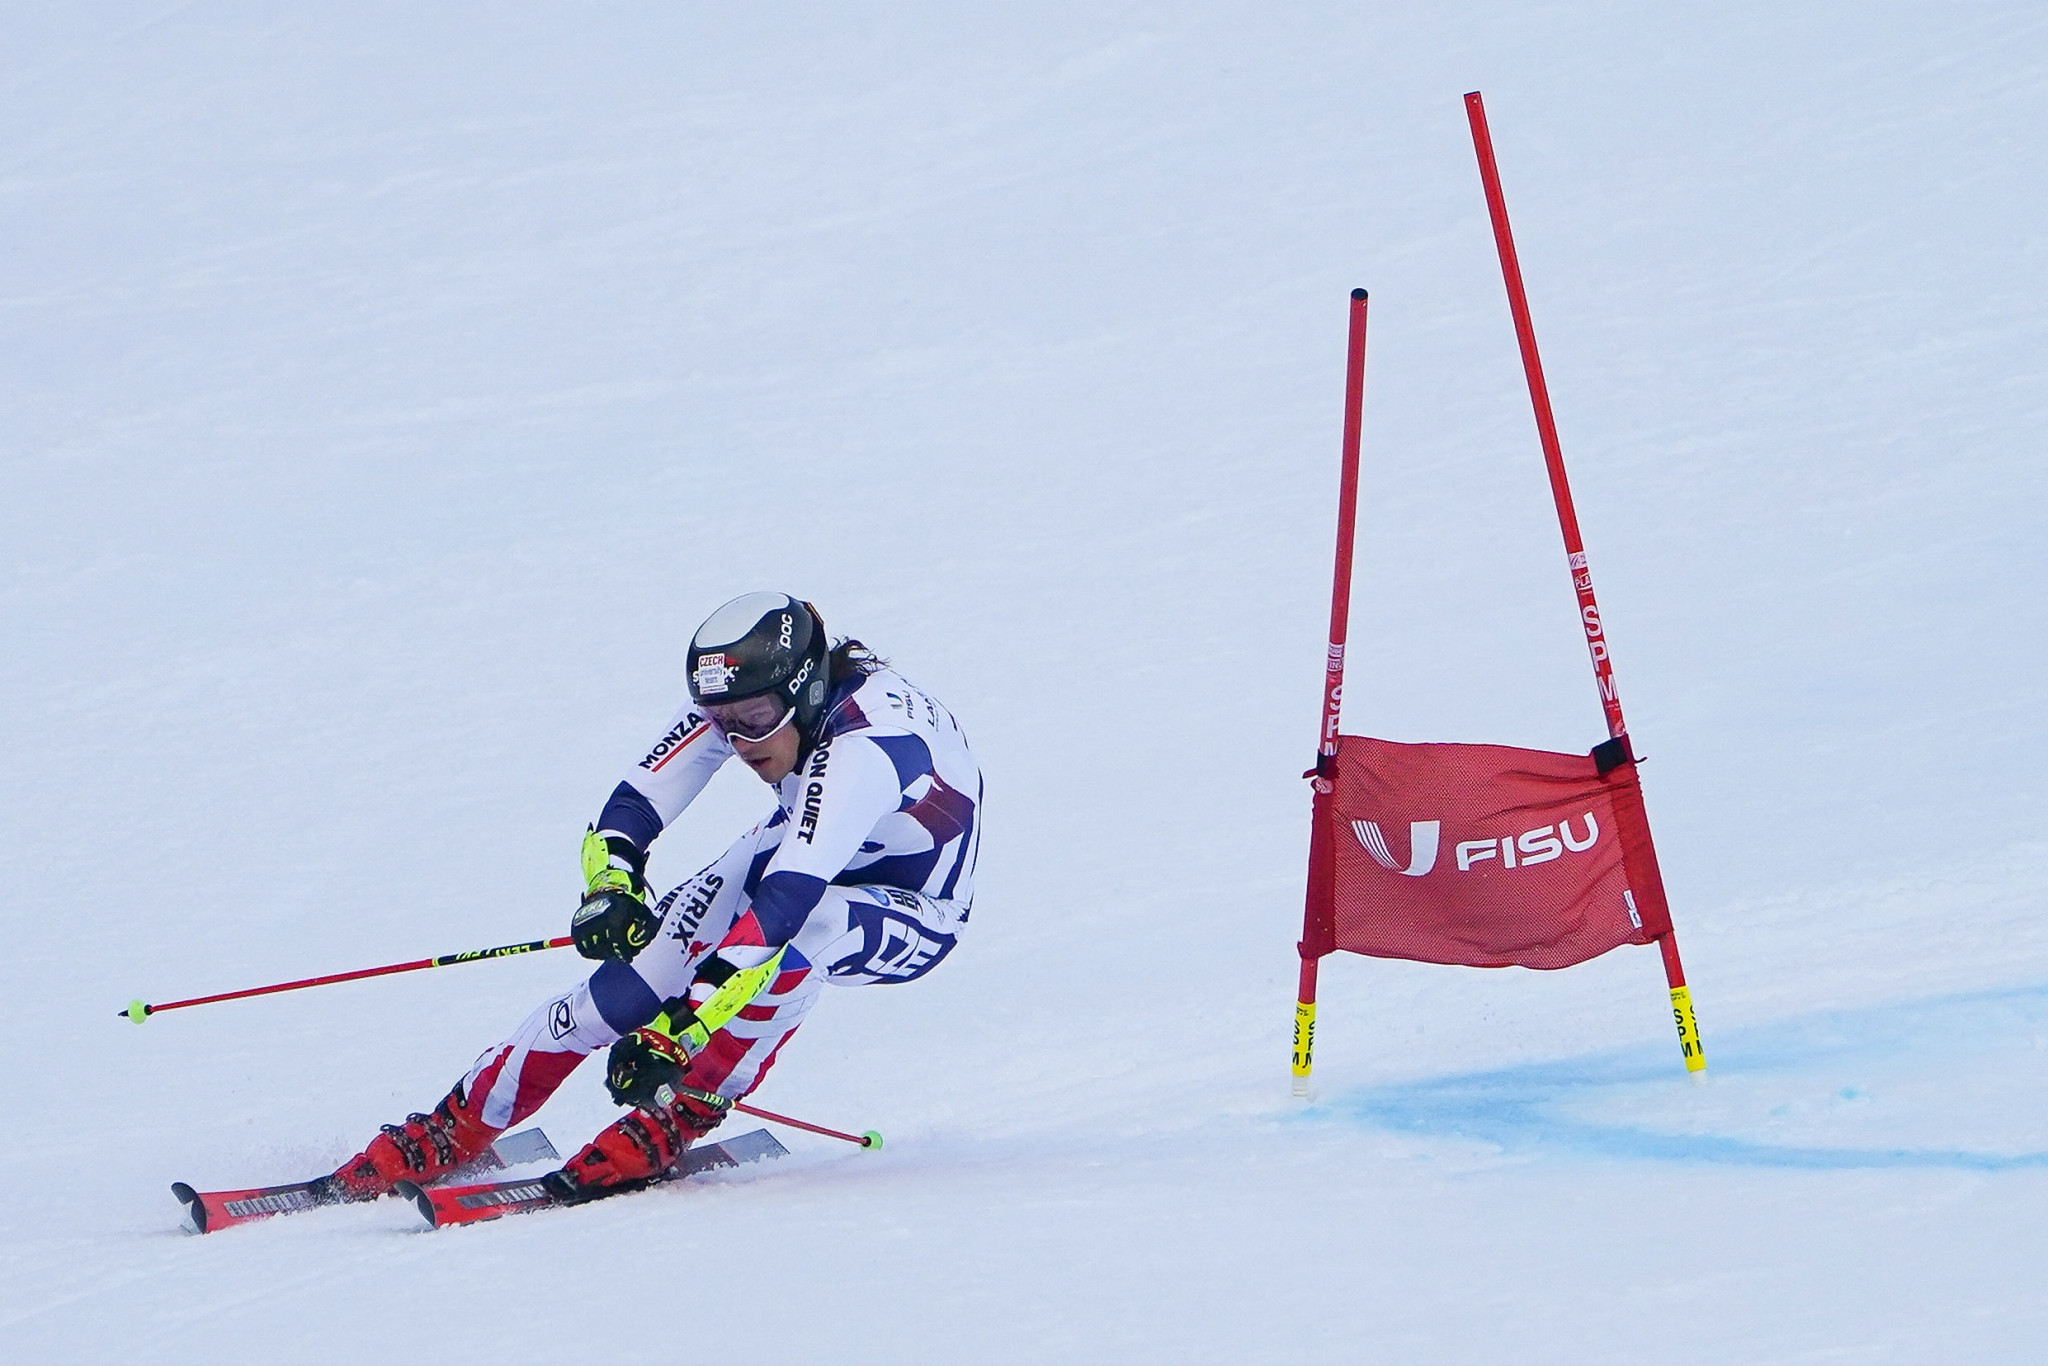 Zabystřan responded to pressure from Switzerland's Eric Wyler to win the men's giant slalom title at Whiteface Mountain ©FISU